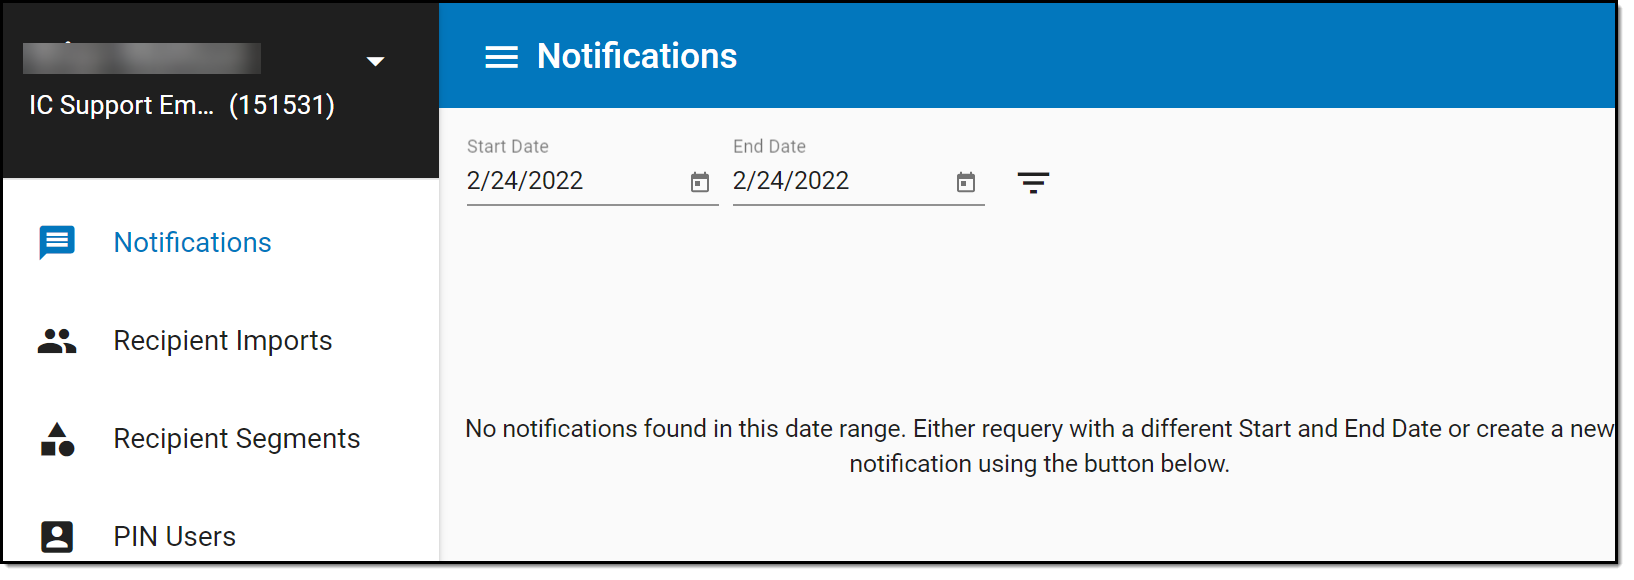 Screenshot of Notifications page in Remote Dial In web access